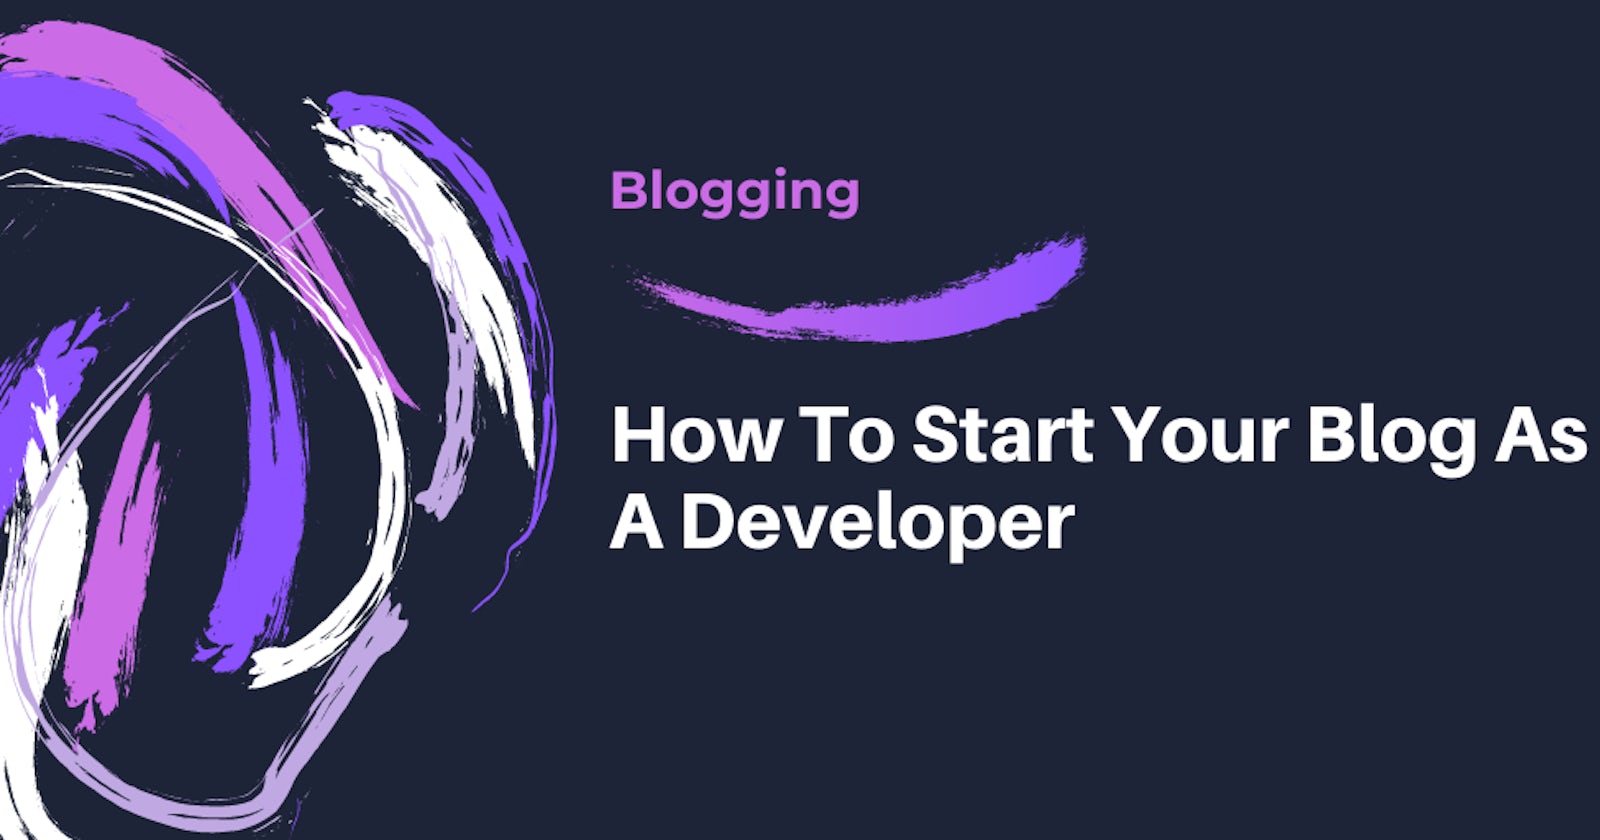 How To Start Your Blog As A Developer